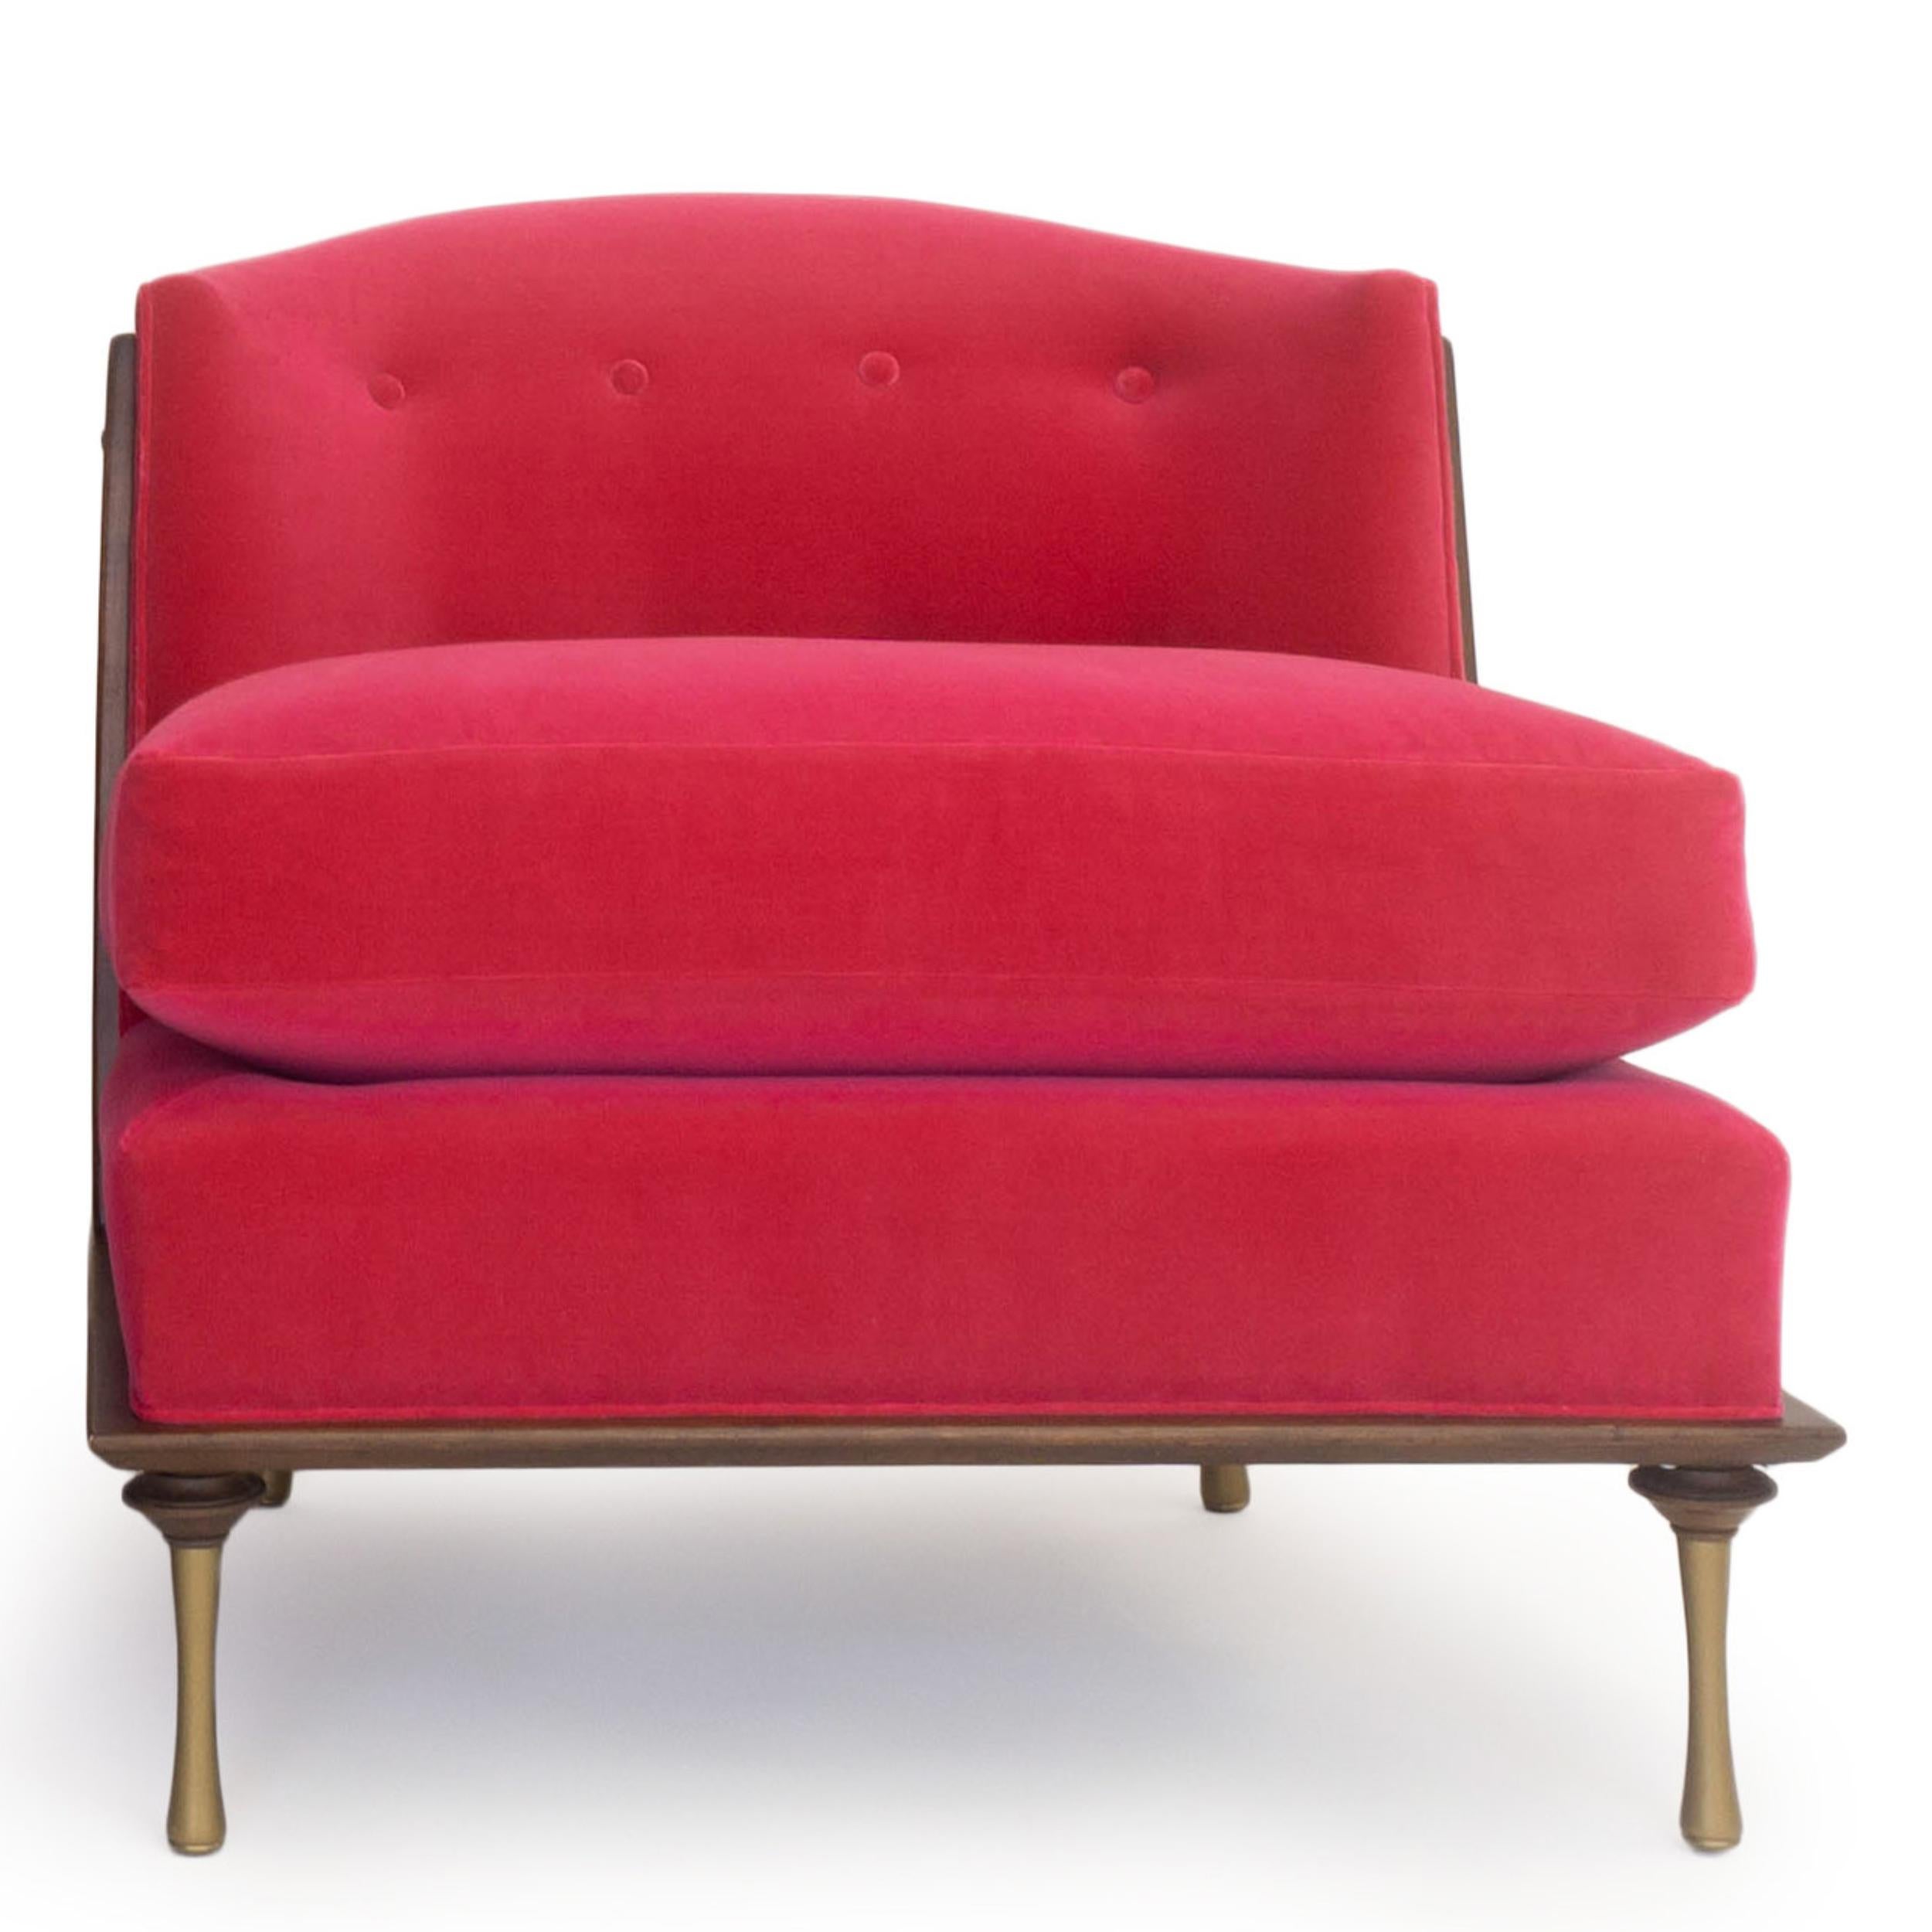 Art Deco inspired slipper chair covered in hot pink velvet feature an exposed wooden frame with a walnut finish, button tufted back cushion, gold painted feet and thick seat. A super comfy chair for great conversations. This piece is built to order